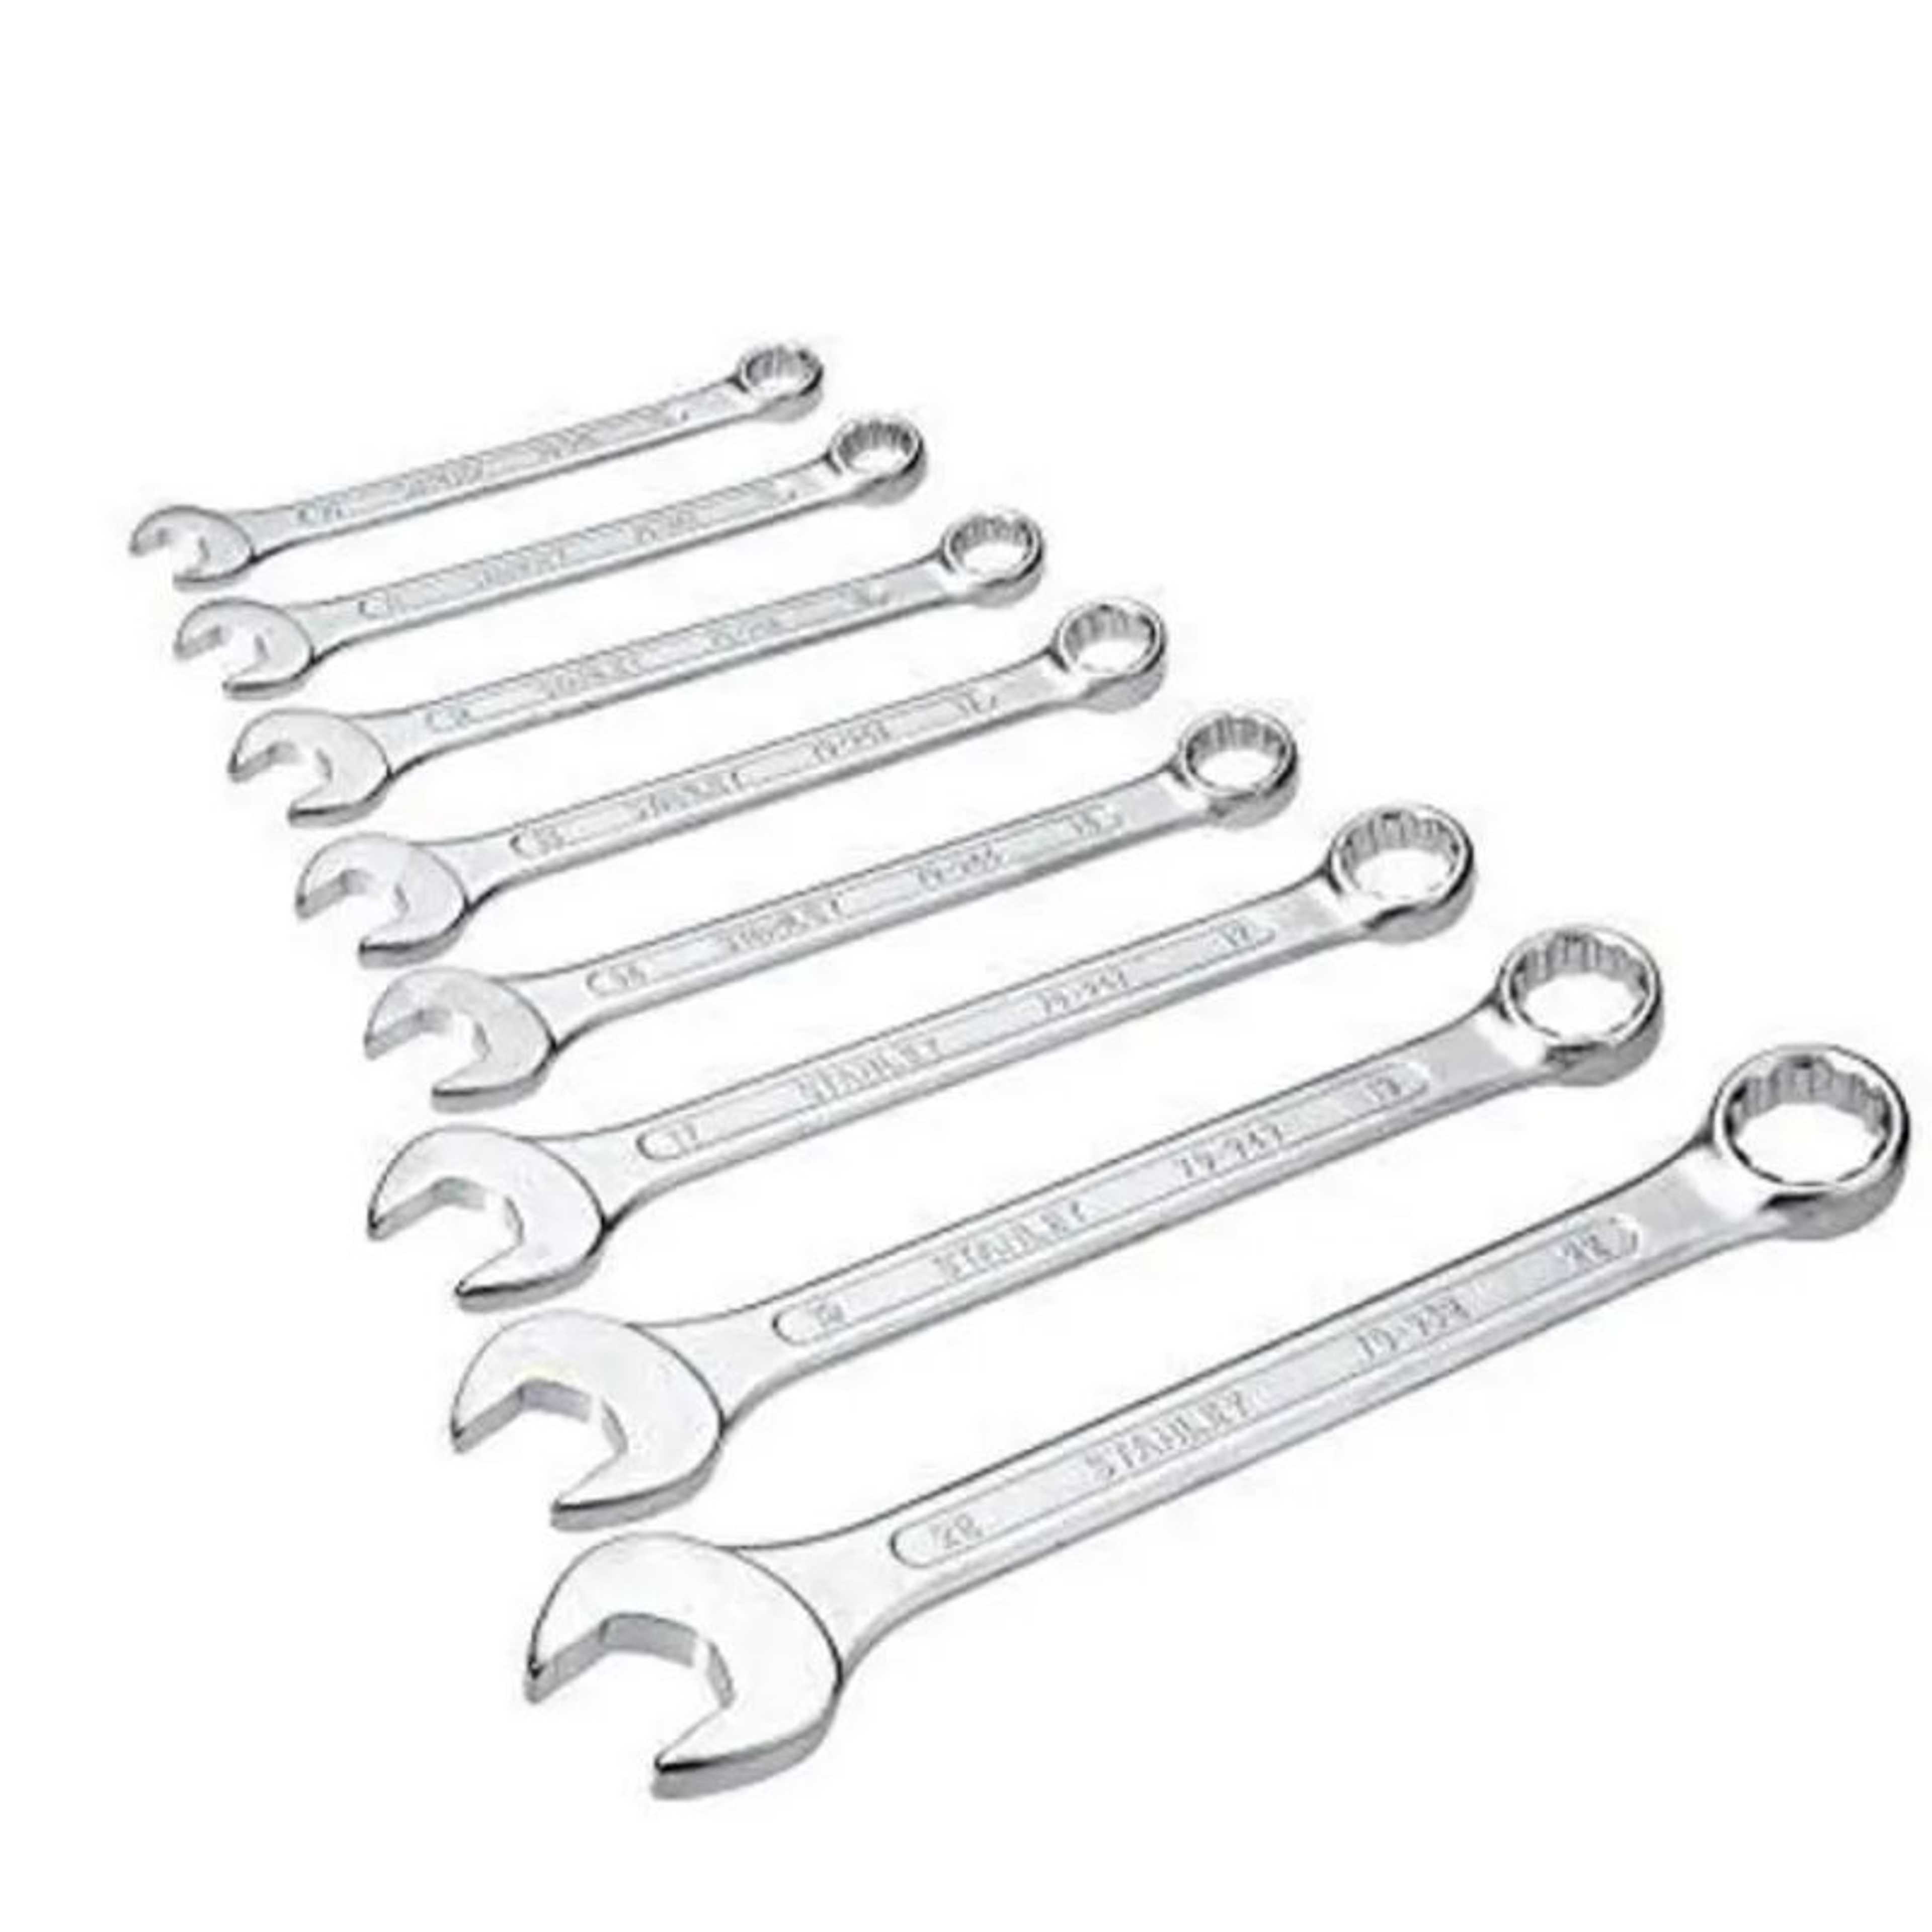 8-19mm Pack of 8 Ring Fix Spanner Set - Heavy Duty